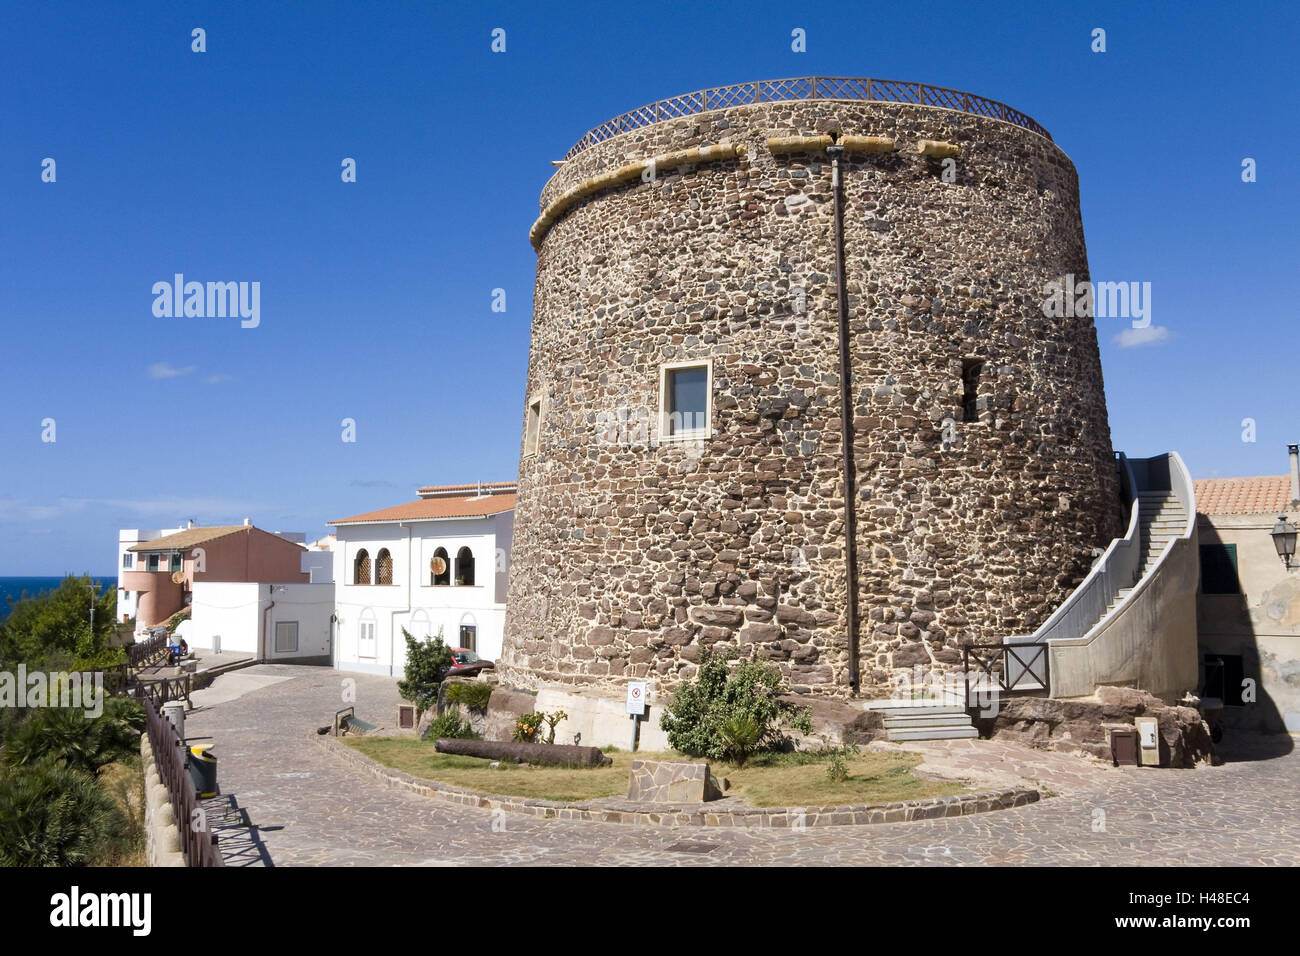 Italy, Sardinia, Isola Tu Sant' Antioco, watch-tower, heaven, blue, island, north coast, Calasetta, military tower, tower, building, architecture, around, defended in numbers, stones, place of interest, tourism, nobody, sunshine, Stock Photo